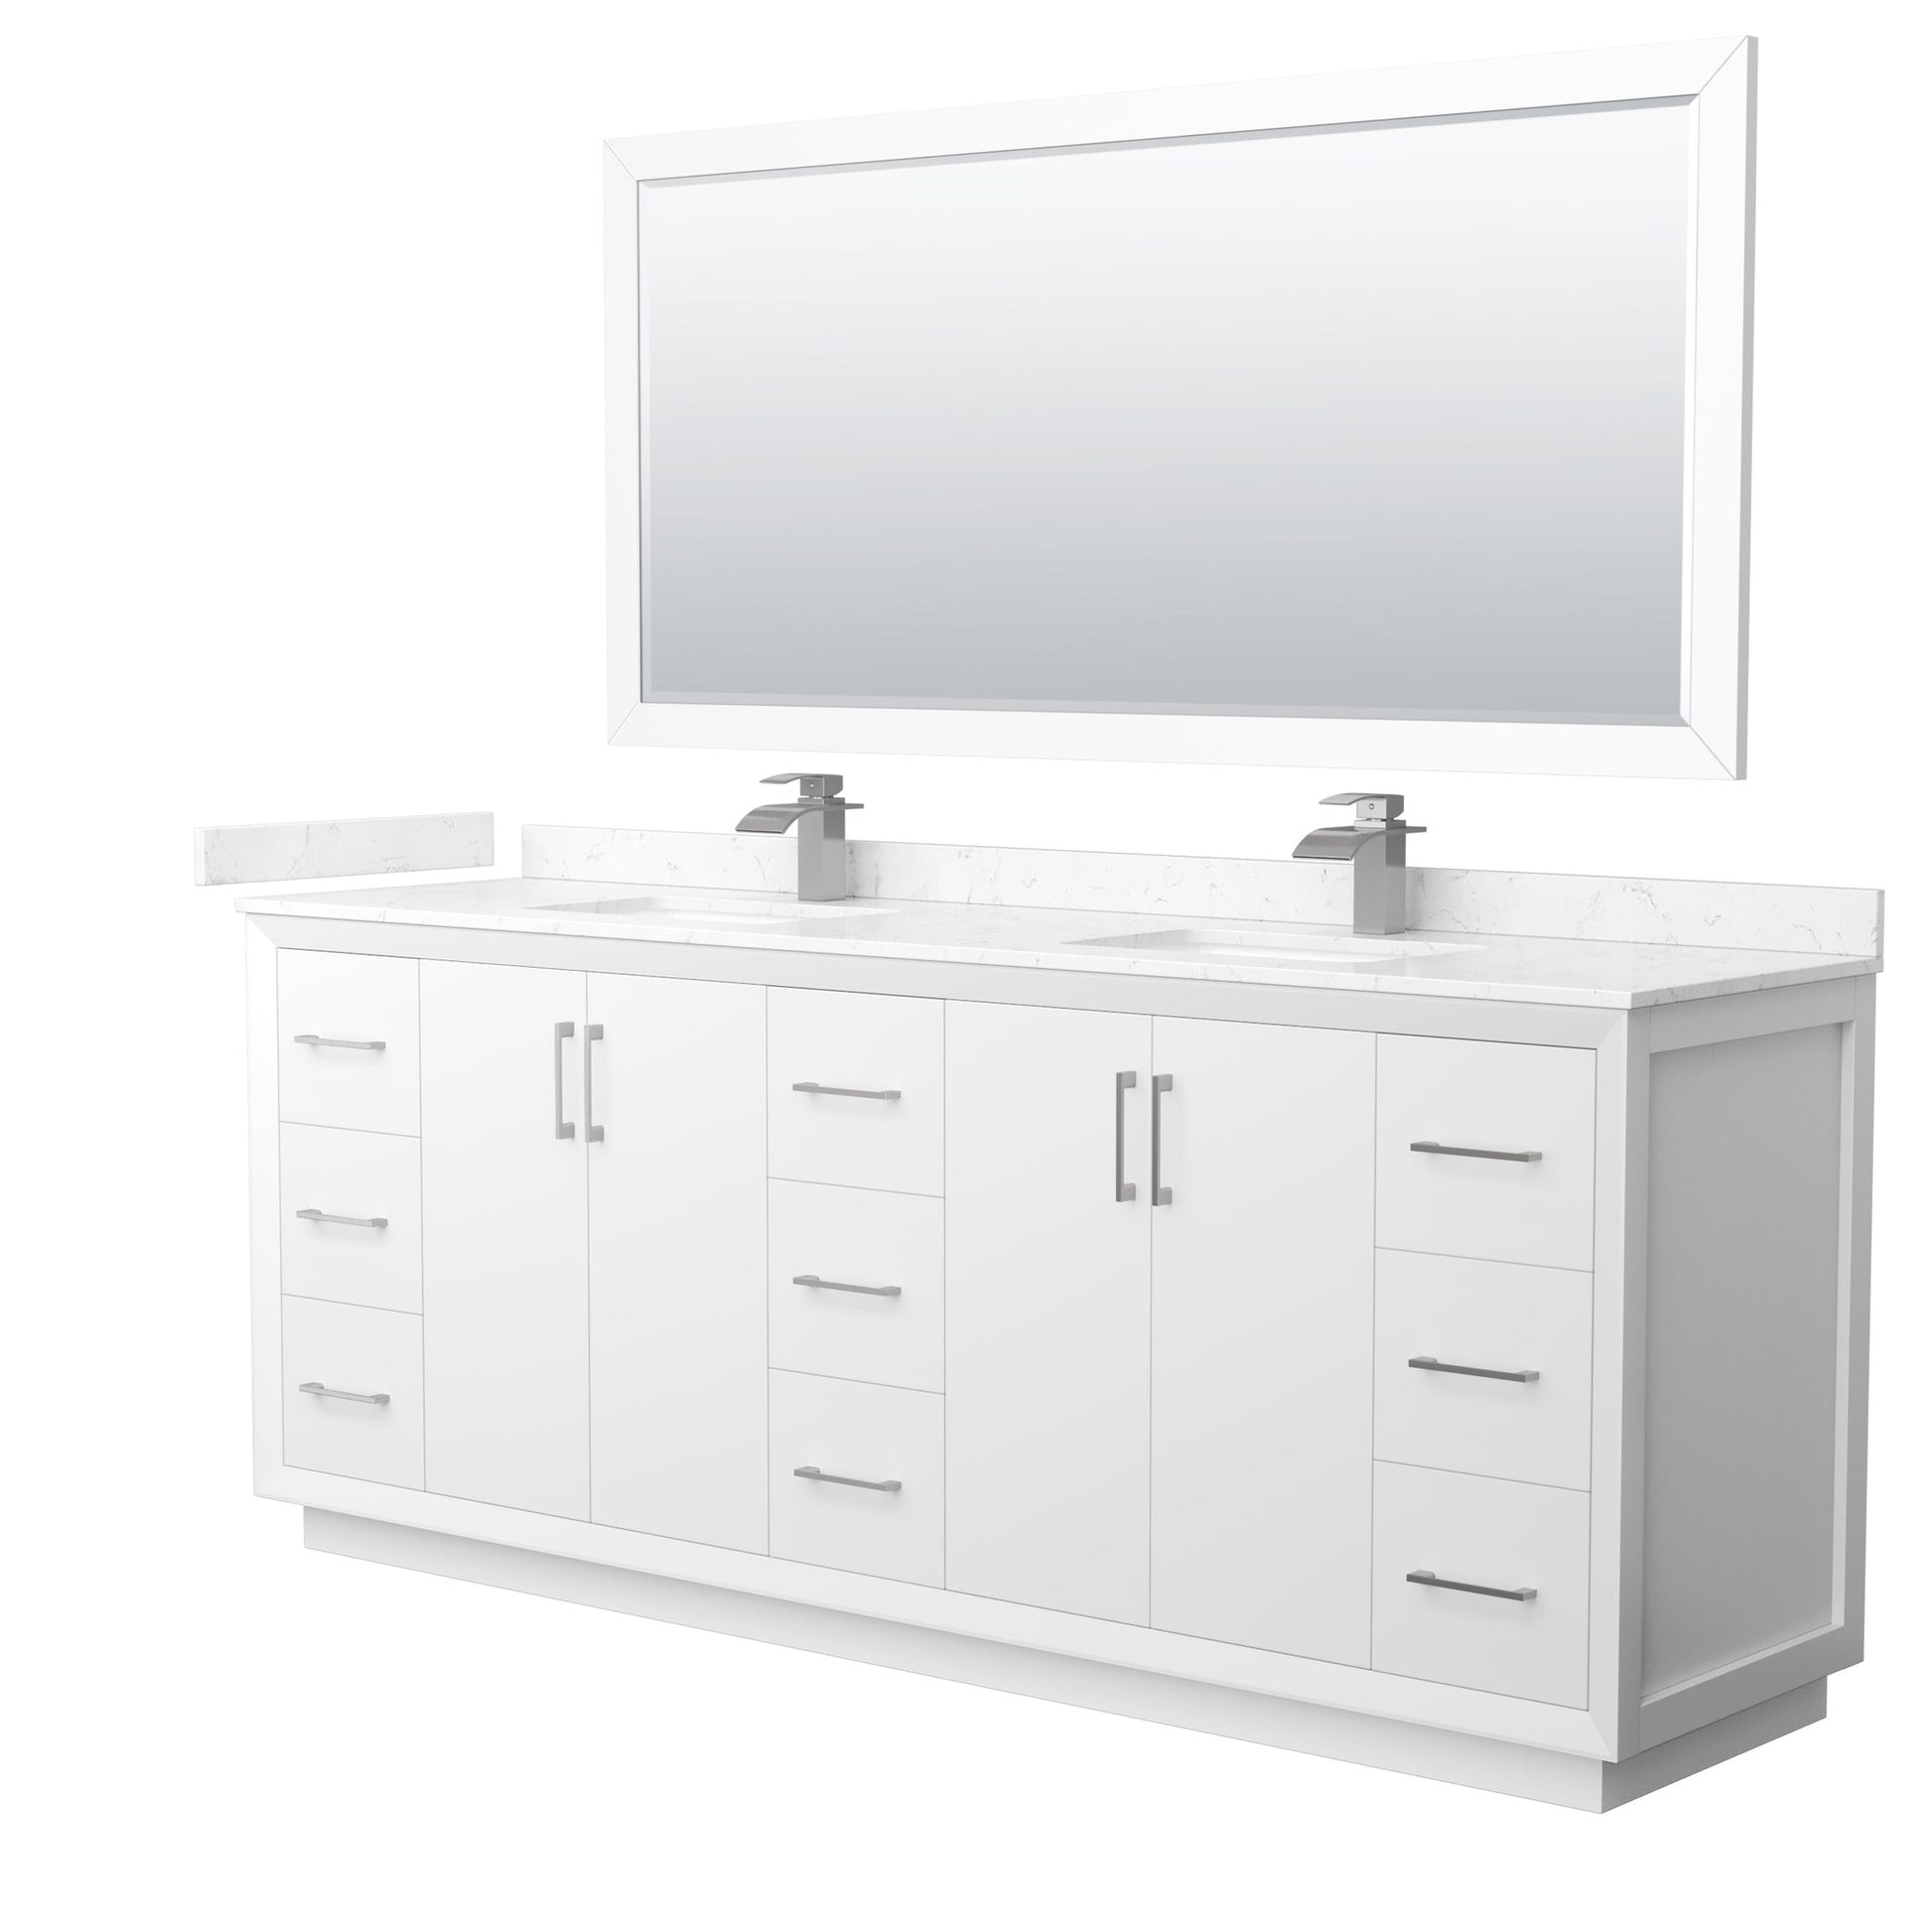 Wyndham Collection Strada 84" Double Bathroom Vanity in White, Carrara Cultured Marble Countertop, Undermount Square Sink, Brushed Nickel Trim, 70" Mirror